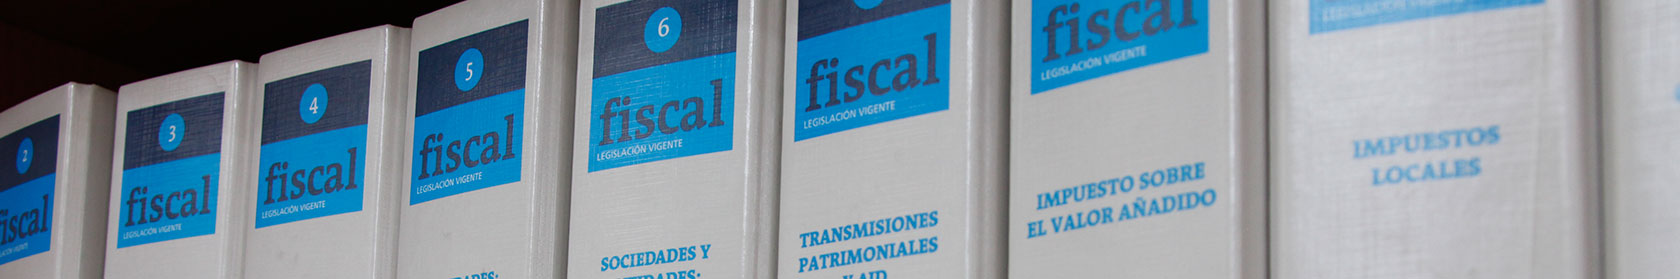 Asesoramiento Fiscal